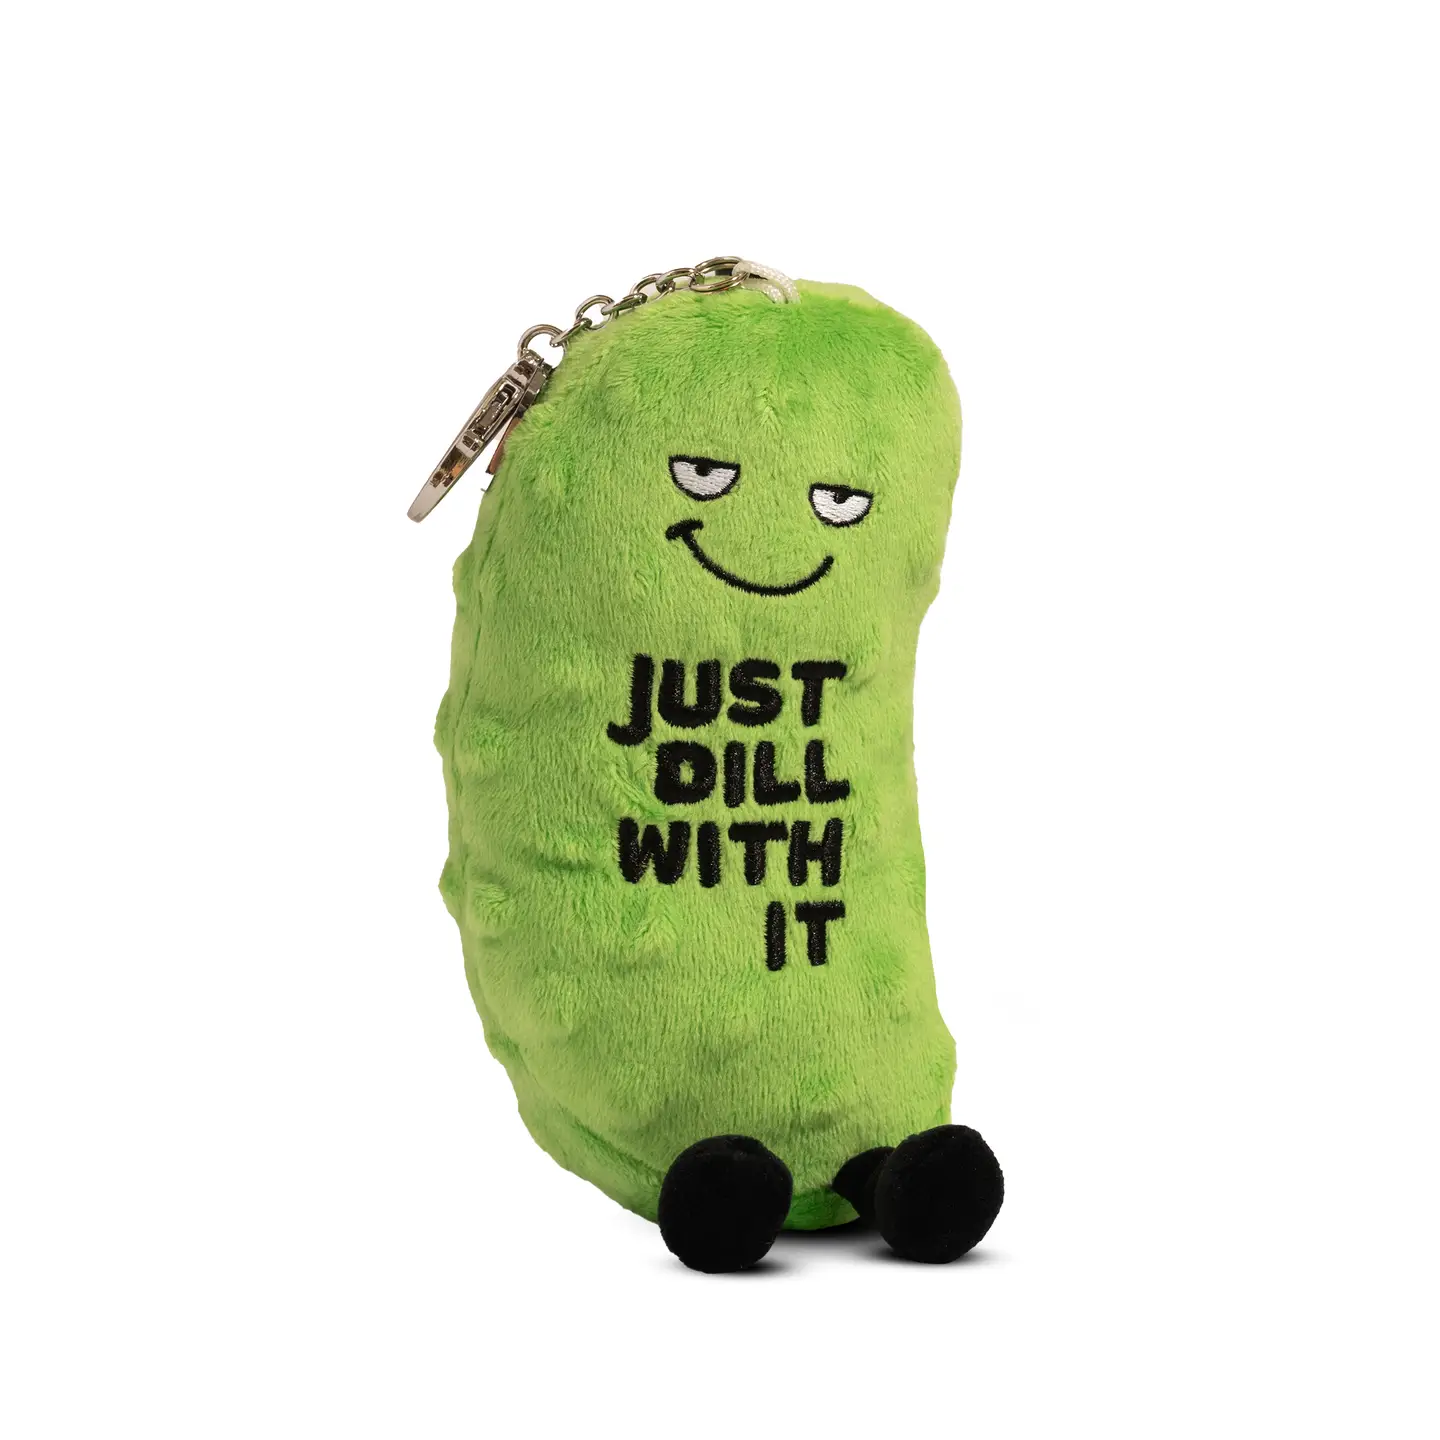 This pickle relishes the truth. He doesn’t have time for your dill-emma. No, he’ll tell you to just dill with it. His no-nonsense expression shows he means business. This is the perfect plushie for any pickle lover.